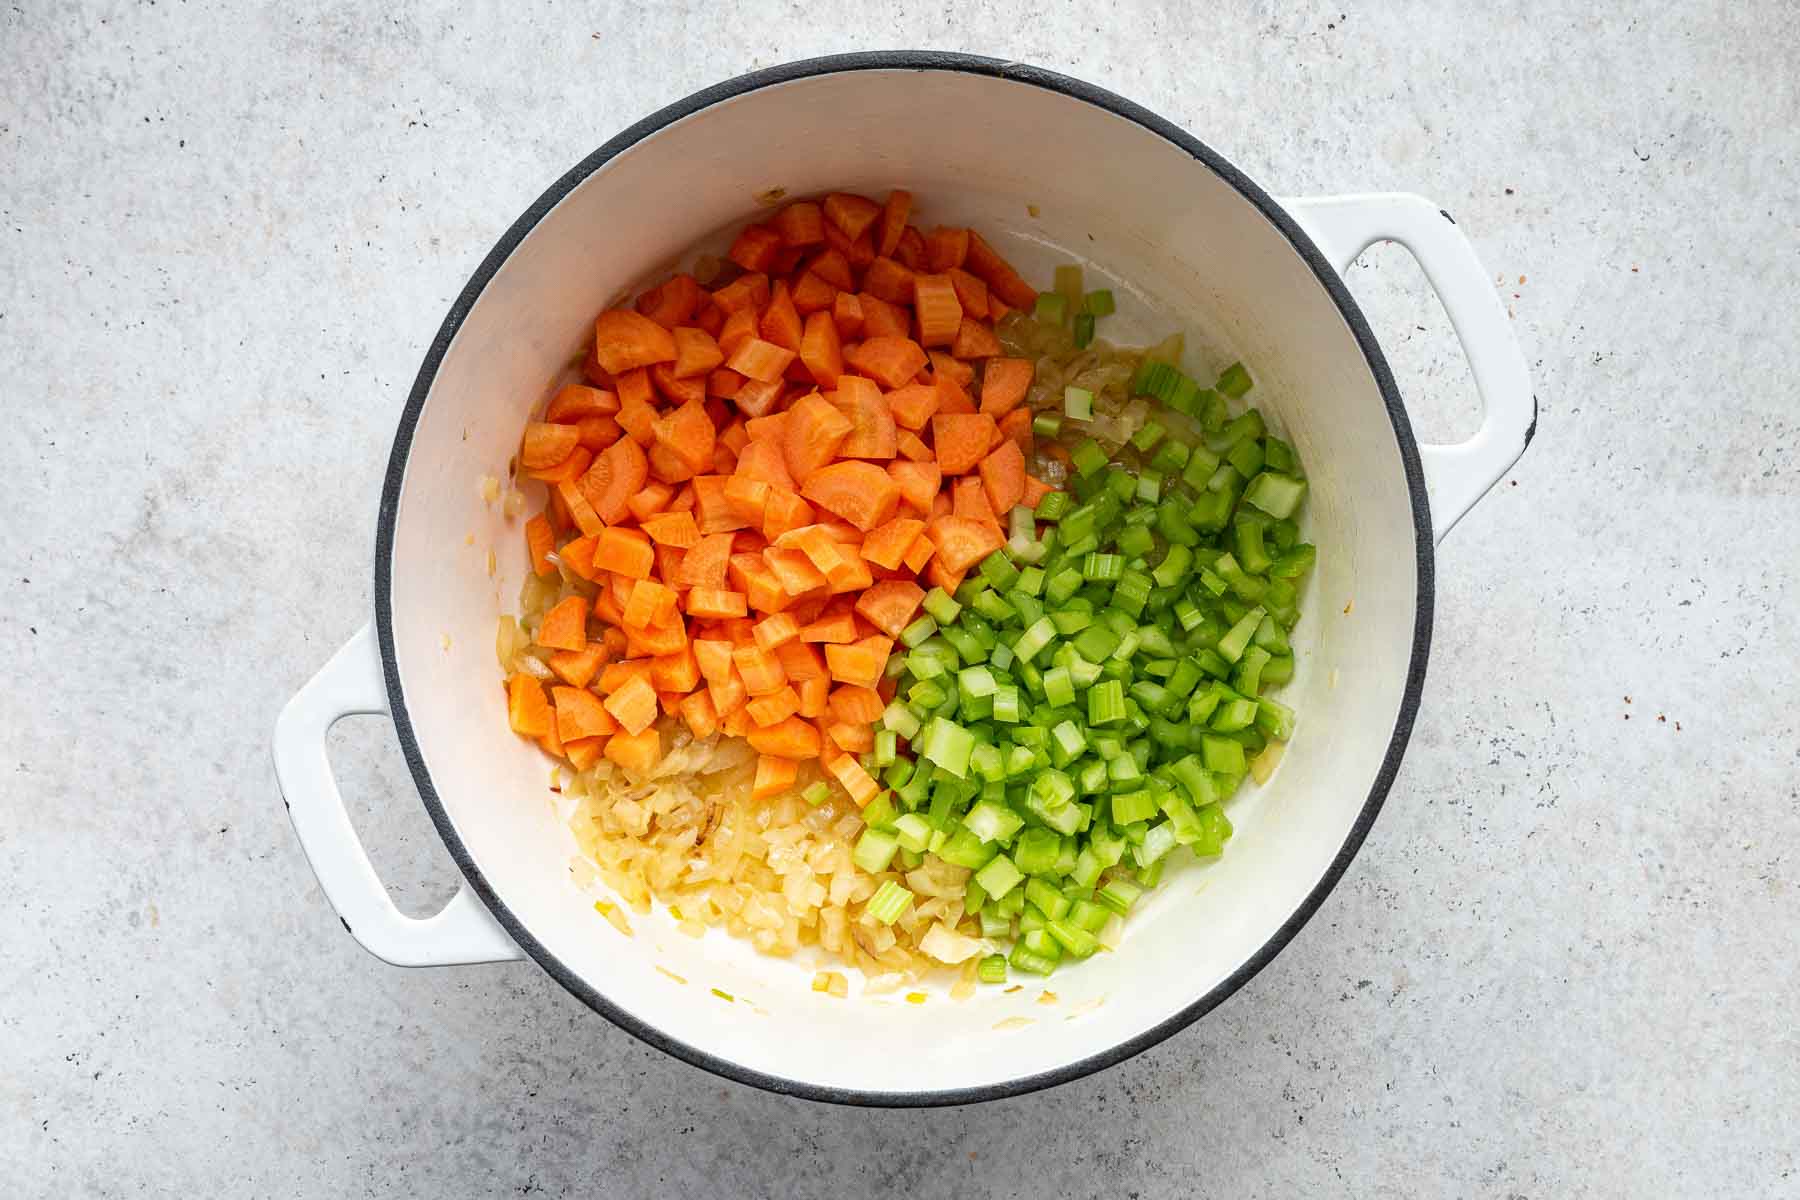 Diced carrots and celery on top of caramelized onions in white pot.